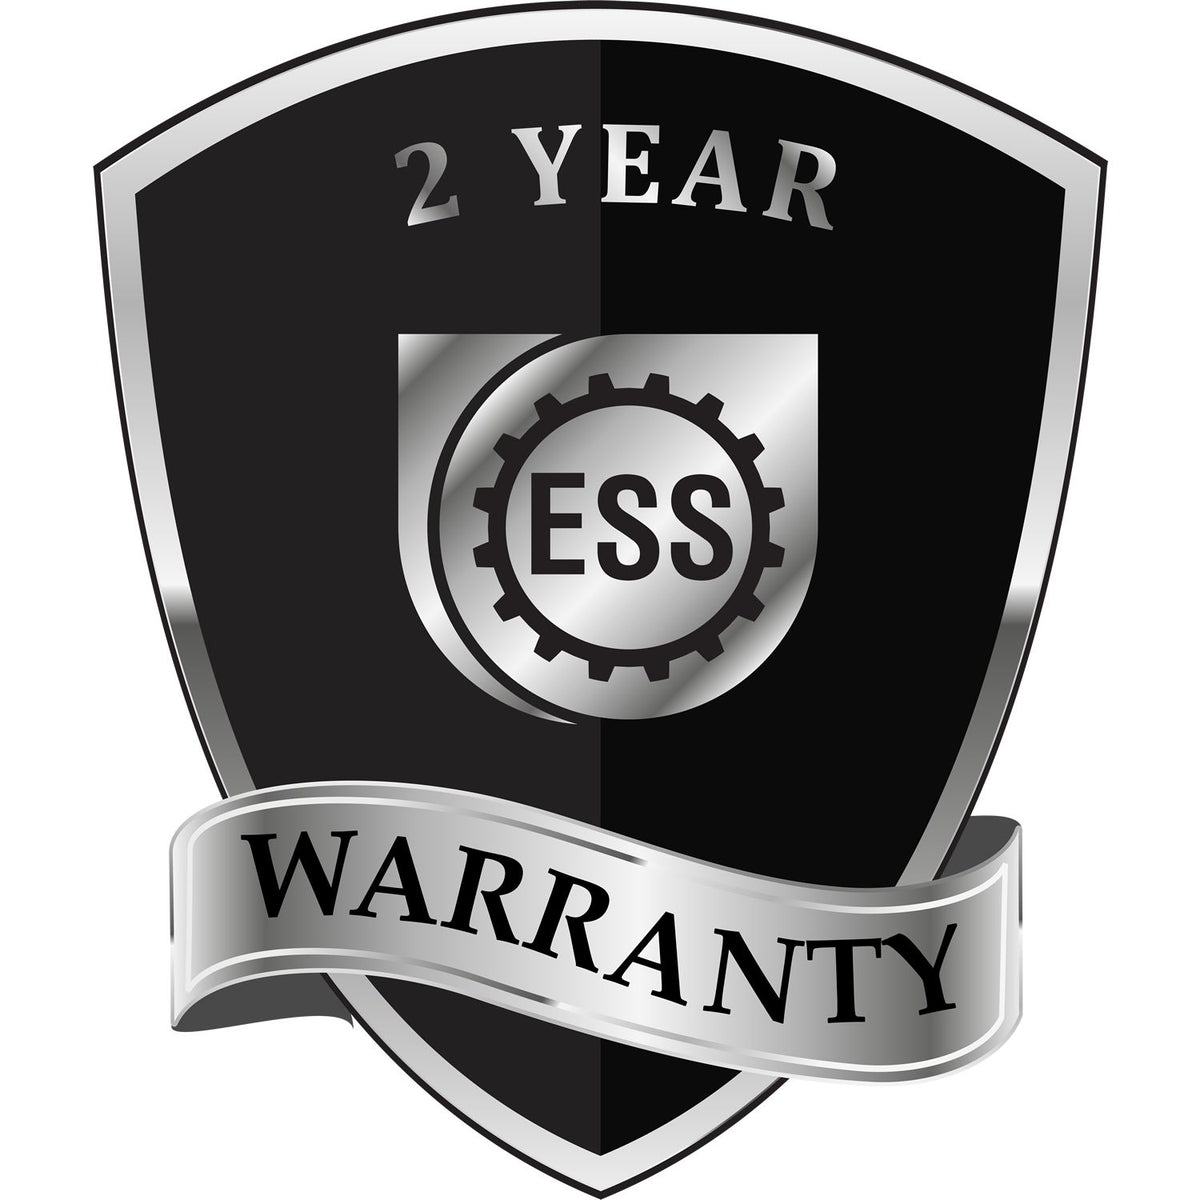 A black and silver badge or emblem showing warranty information for the Hybrid Arizona Geologist Seal